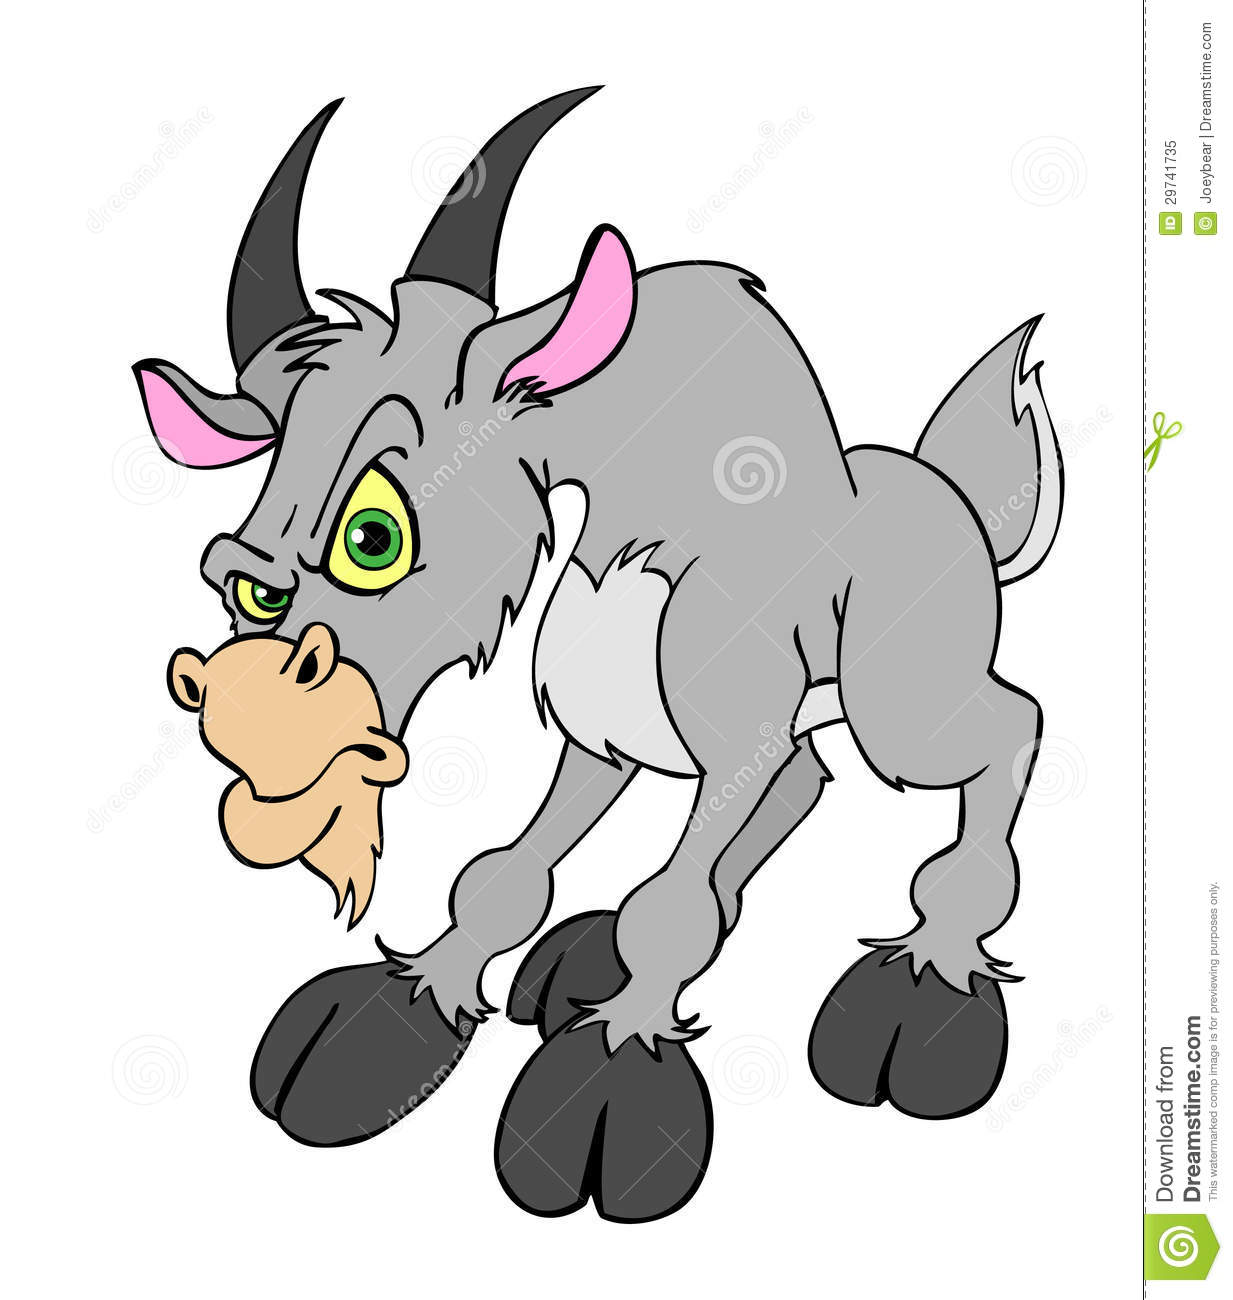 Billy goat clipart.